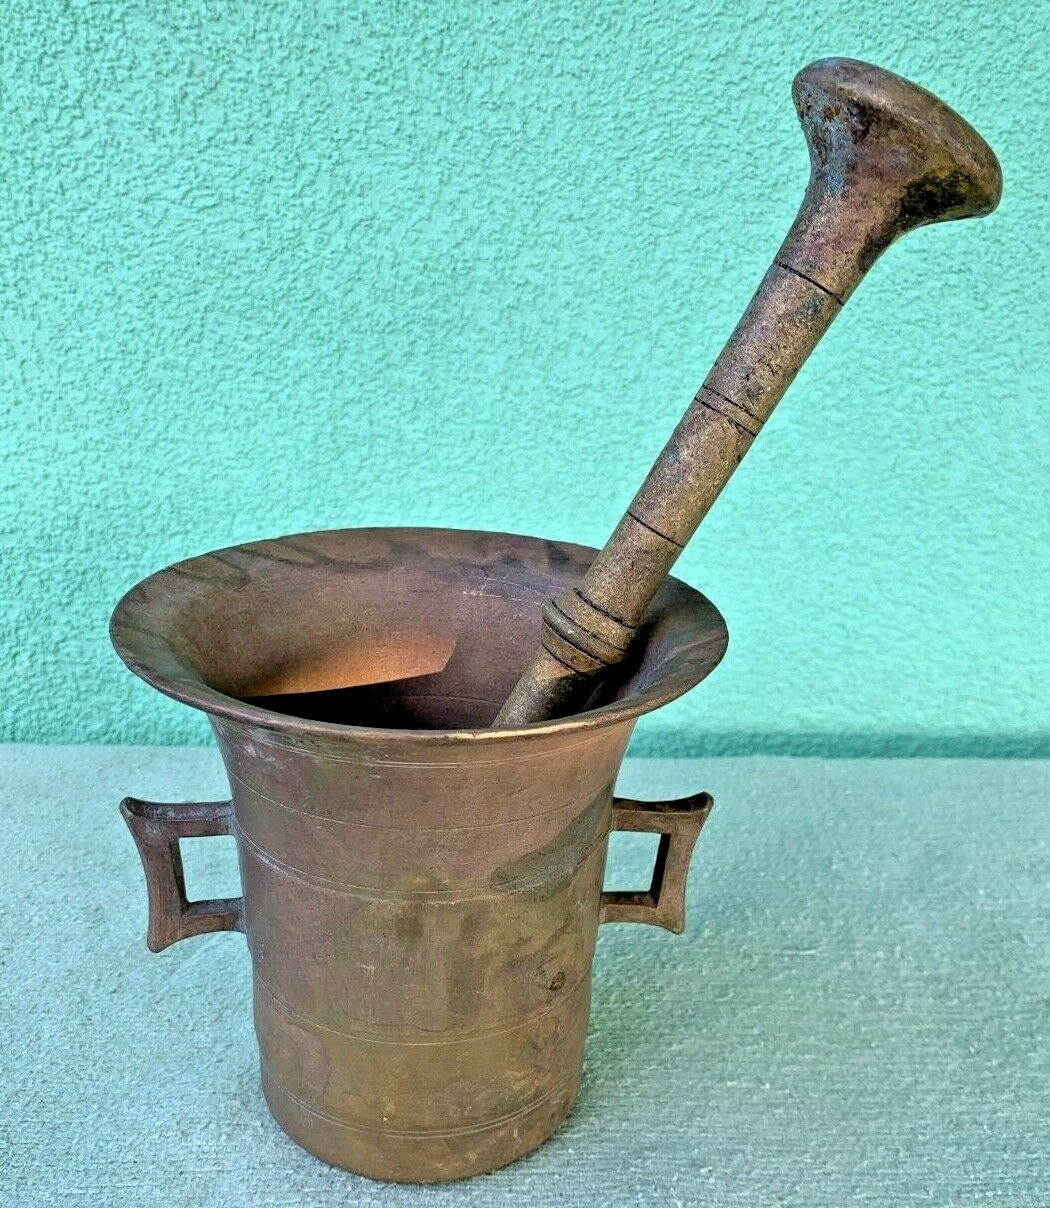 Vintage Large Brass Mortal And Pestle Antique Pharmacy Apothecary Ussr Soviet 5"